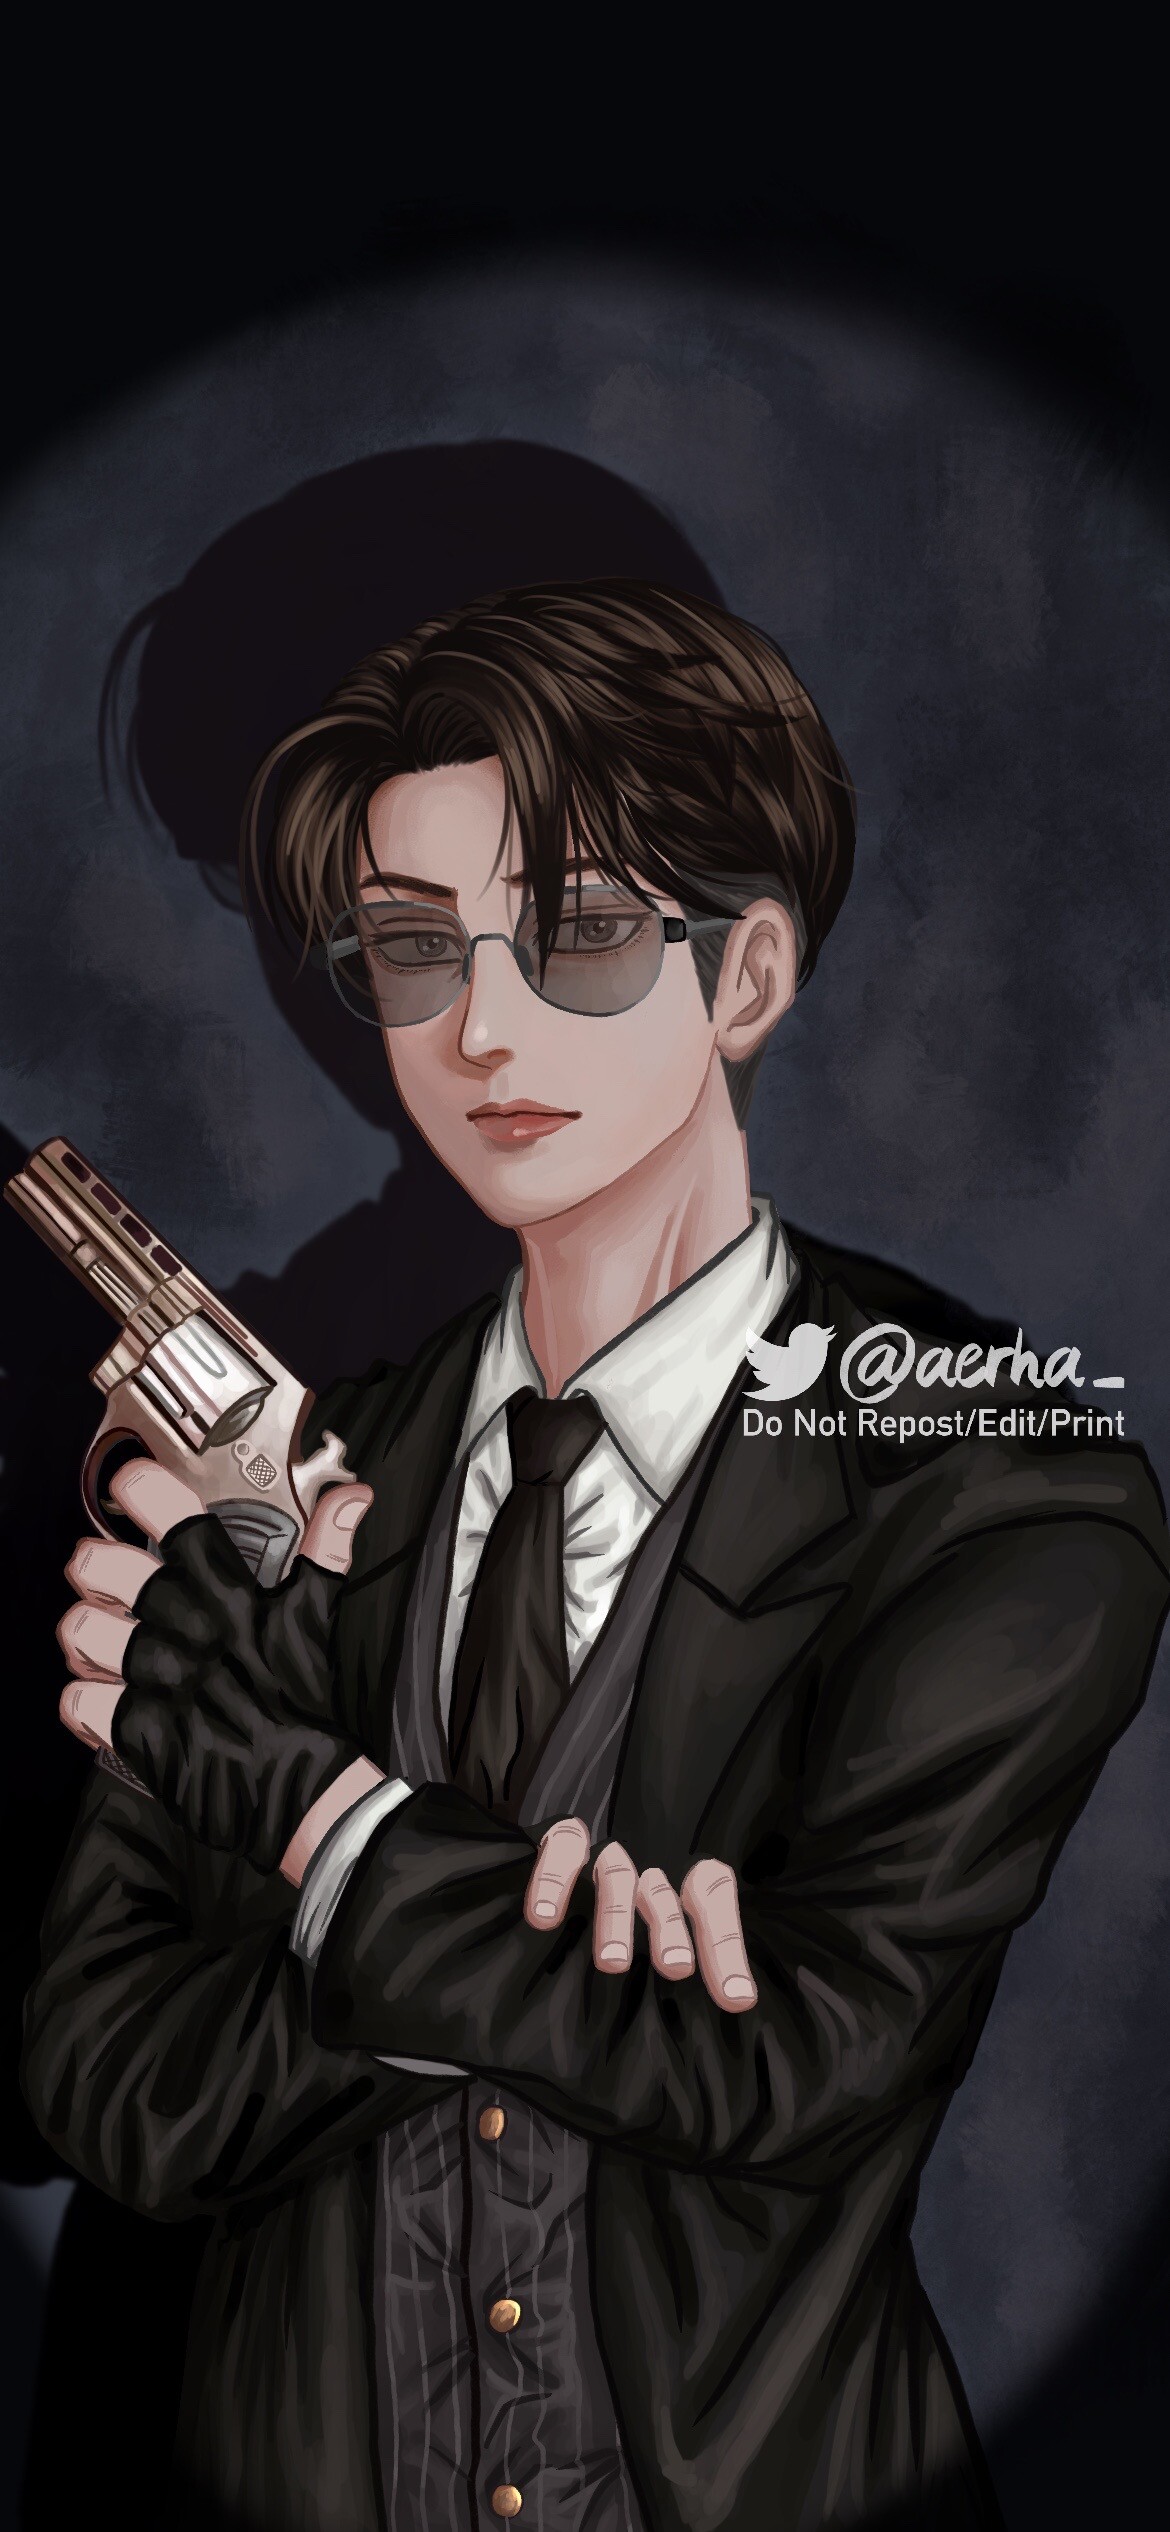 Pawiee Art - My OC Vincent the Mafia boss I have learn a... | Facebook